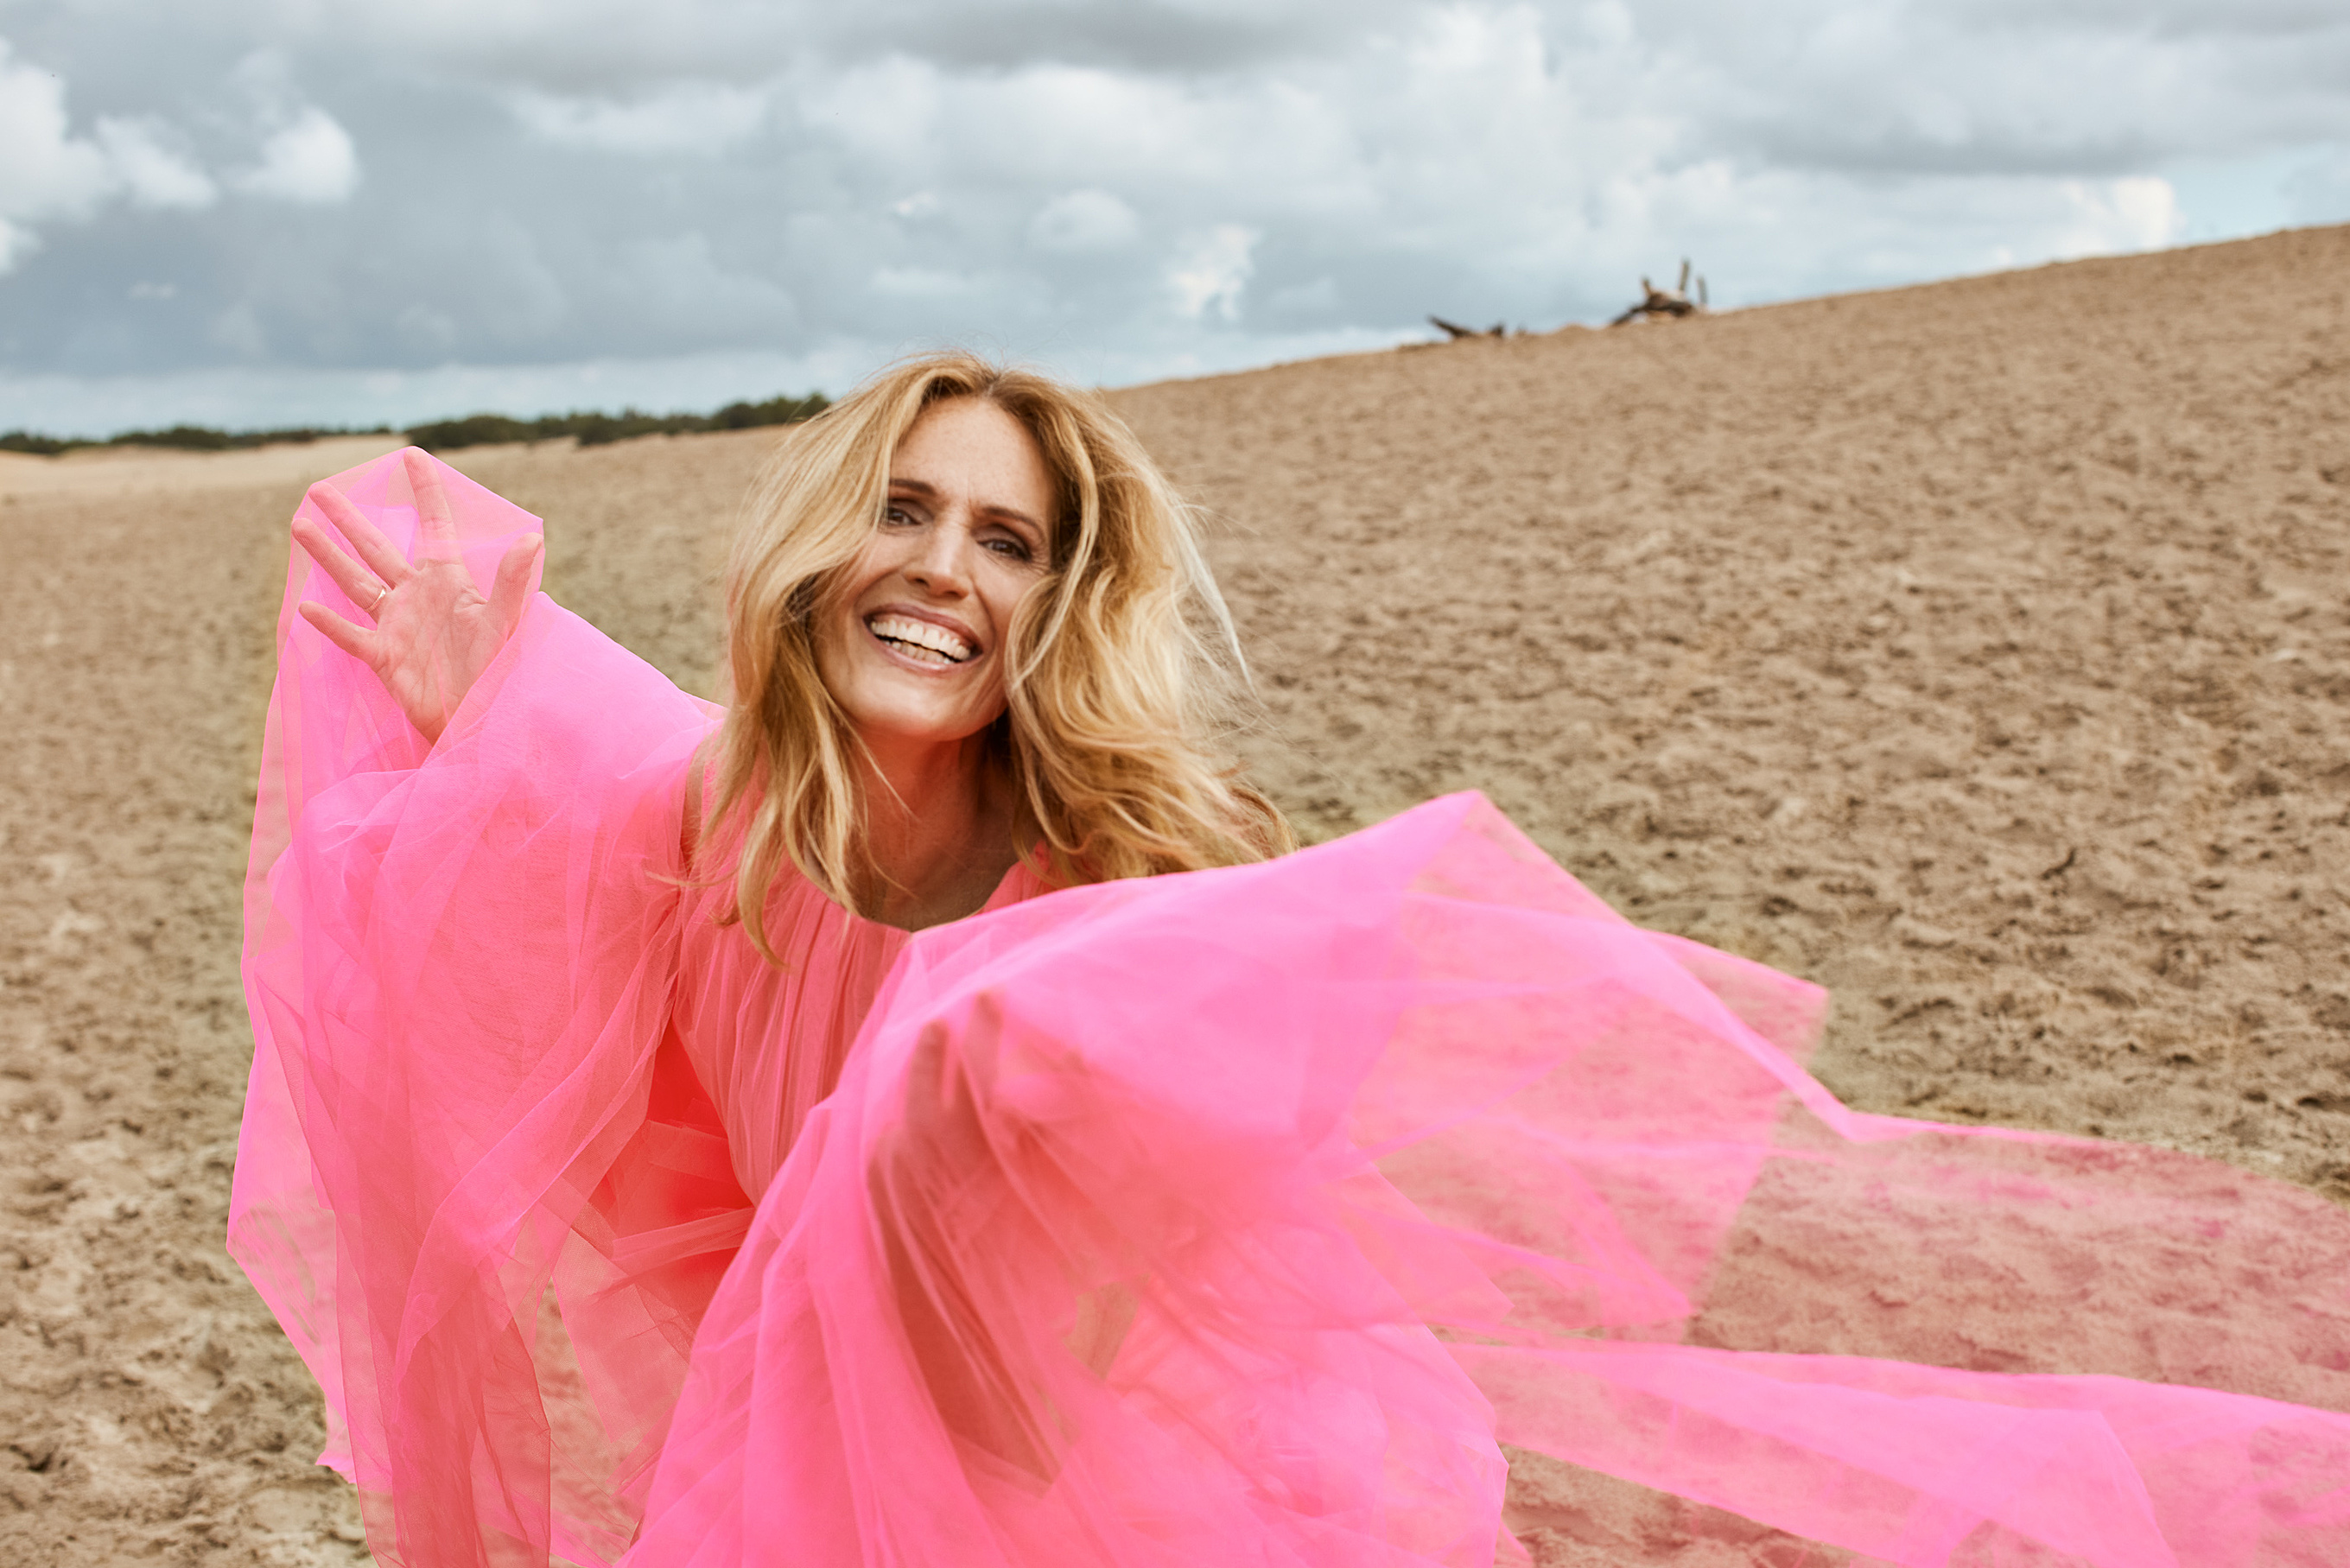 Fashioncollection, fashioneditorial, editorial, Lookbook, Shooting, Some Eden, Mode, Photoshoot, pink tulle dress, the model is in movement and walk through the sand